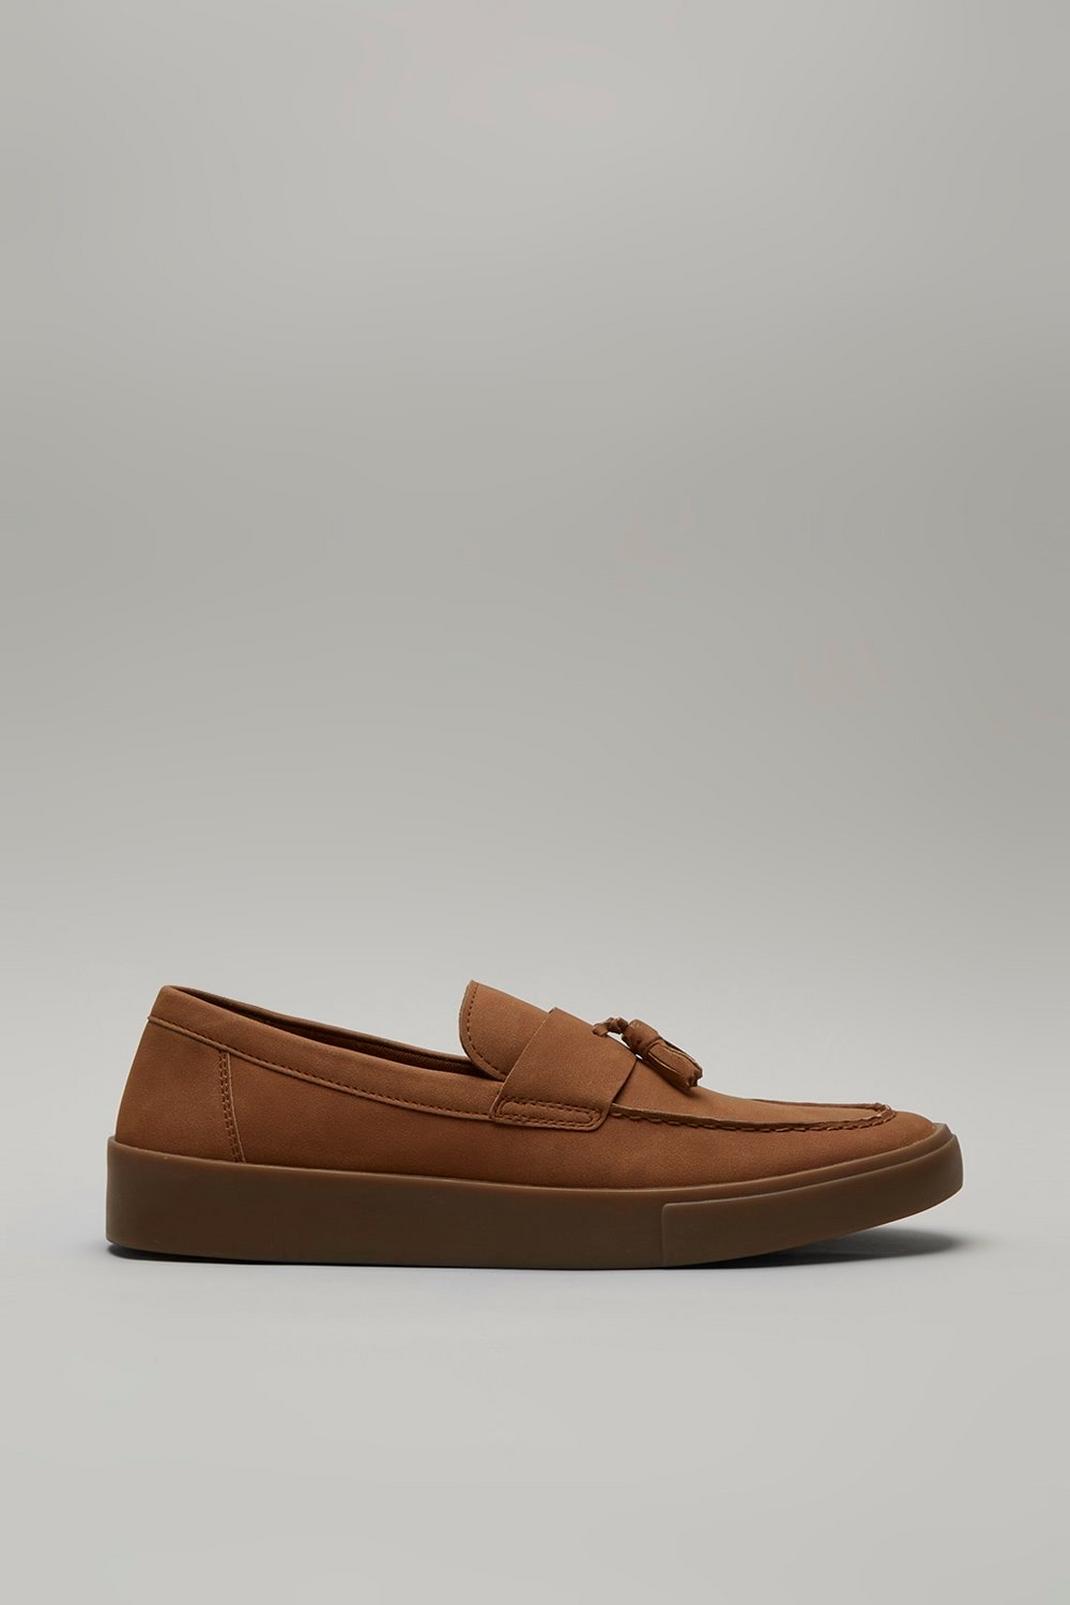 Tan Slip On Shoes With Tassel Detail image number 1